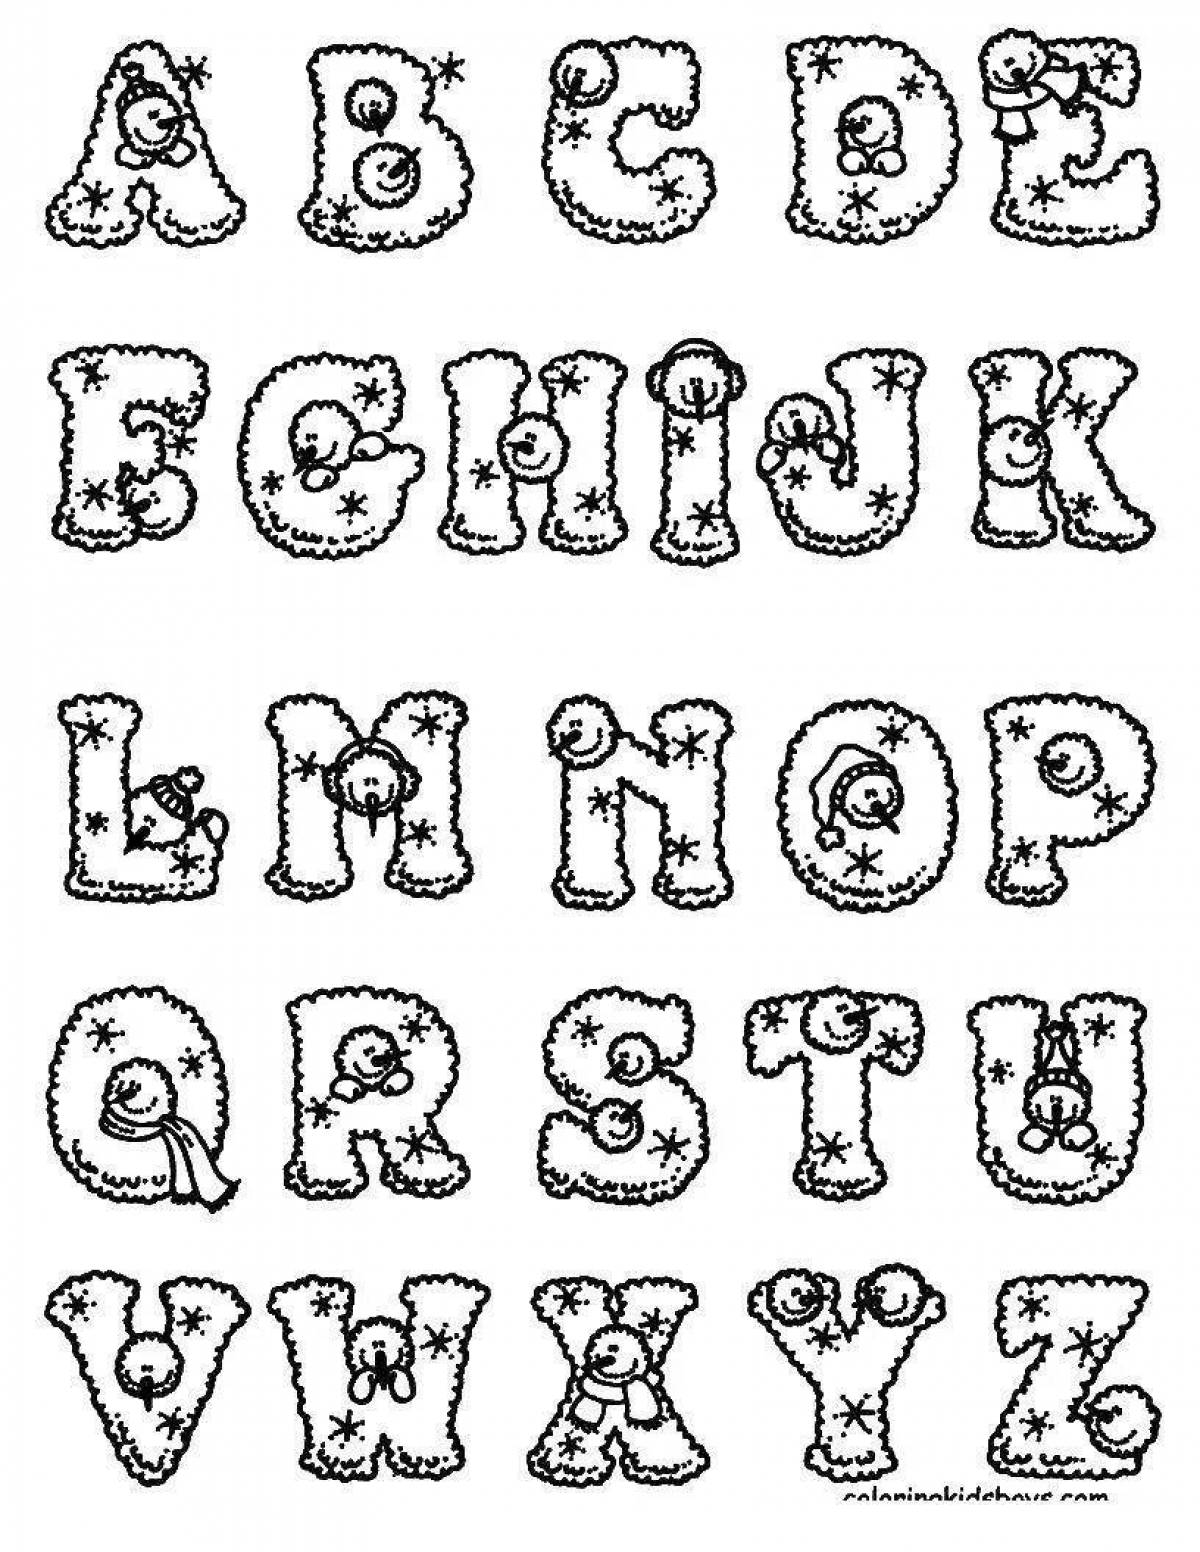 Colorful fun alphabet coloring page